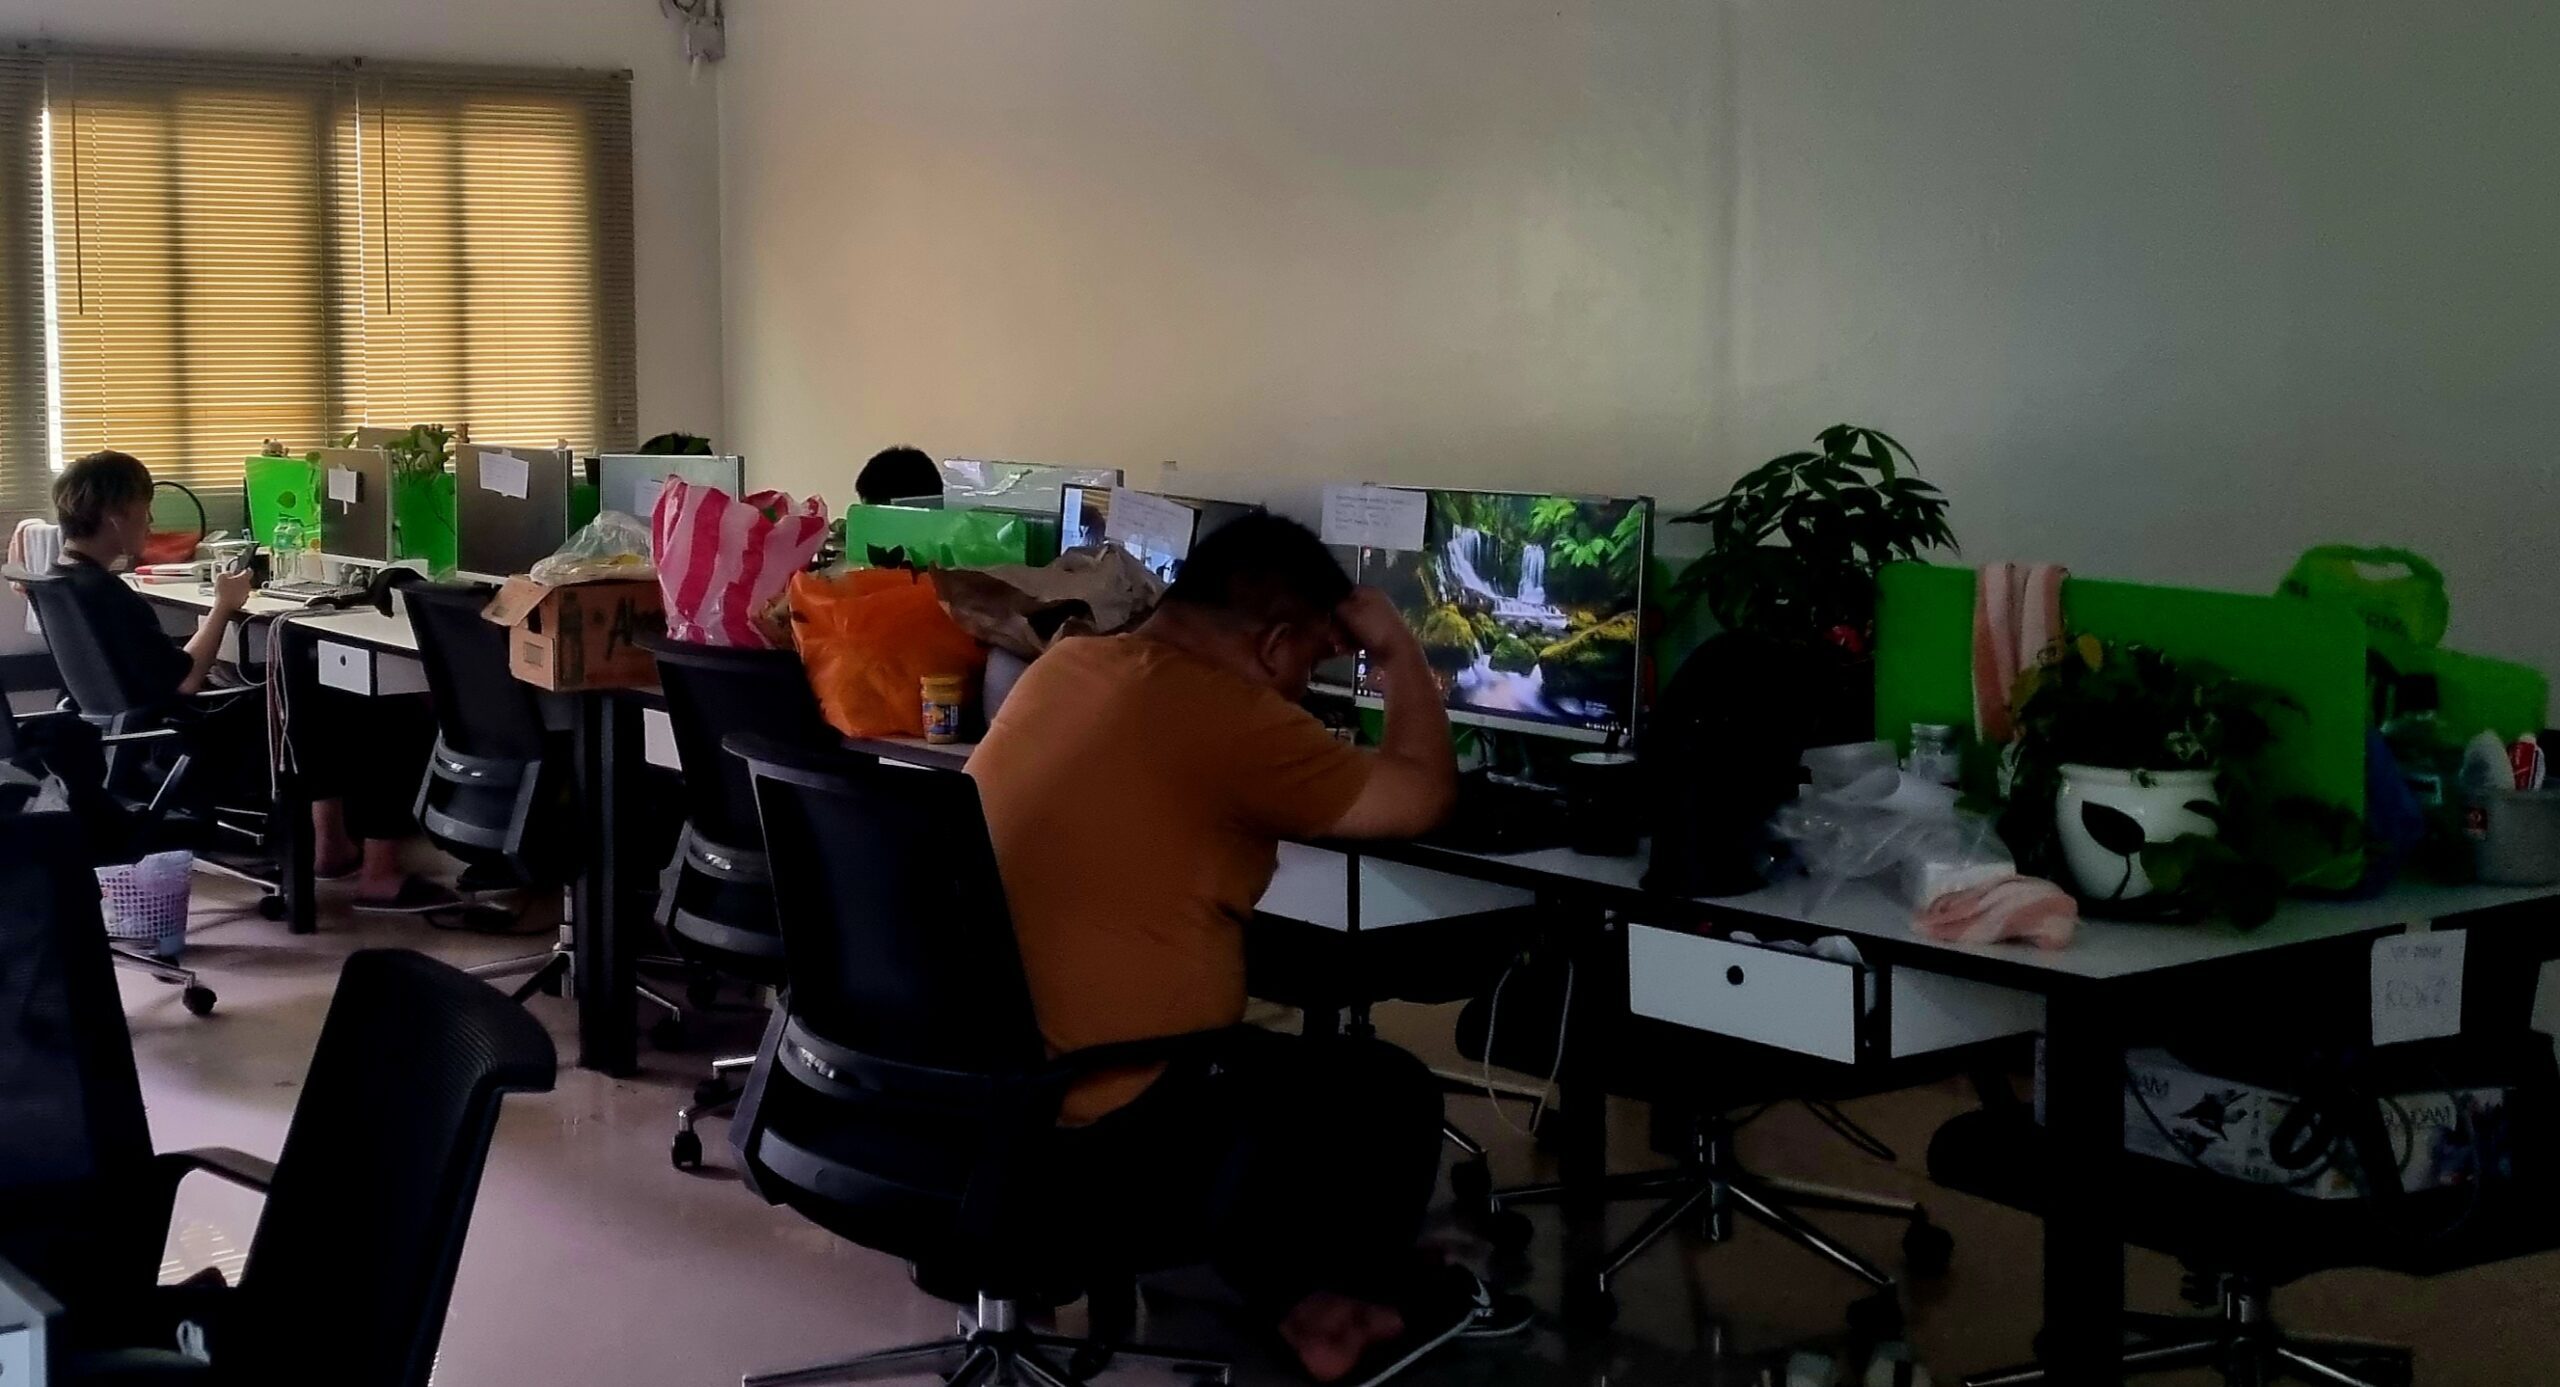 6 foreigners suspected to be behind ‘scam hub’ moved to BI facility in Taguig